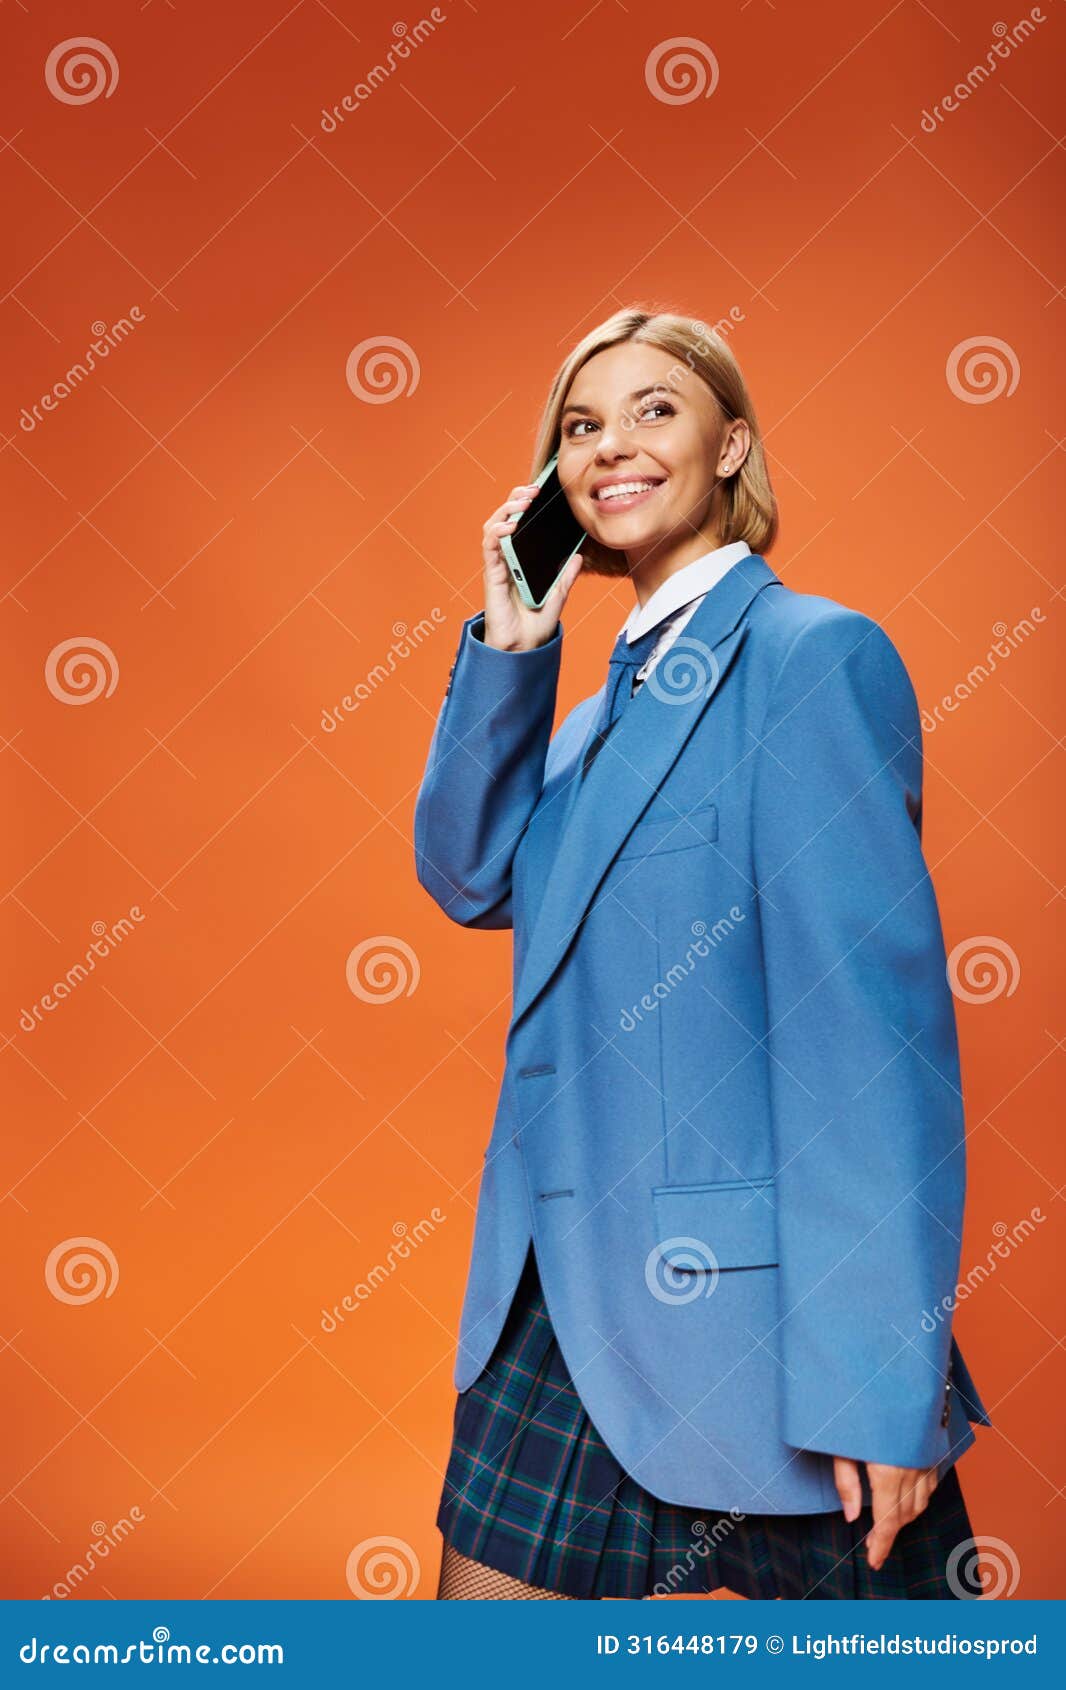 joyous well dressed woman with short